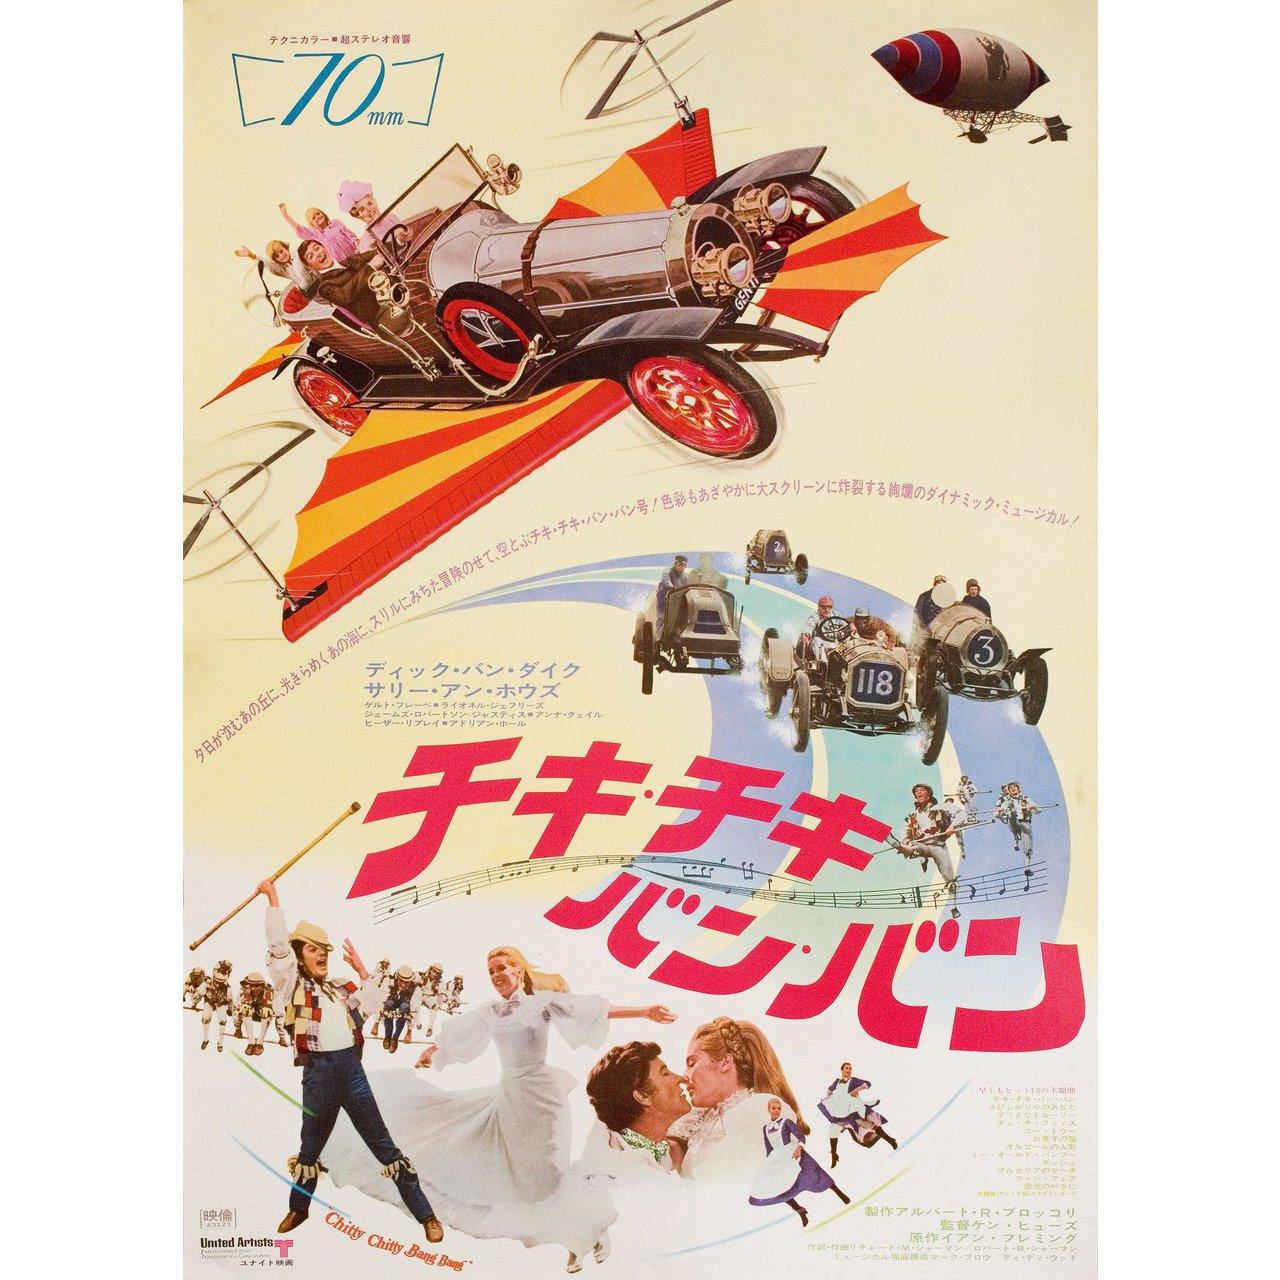 Original 1969 Japanese B2 poster for the film ‘Chitty Chitty Bang Bang’ directed by Ken Hughes with Dick Van Dyke / Sally Ann Howes / Lionel Jeffries / Gert Frobe. Fine condition, rolled. Please note, the size is stated in inches and the actual size